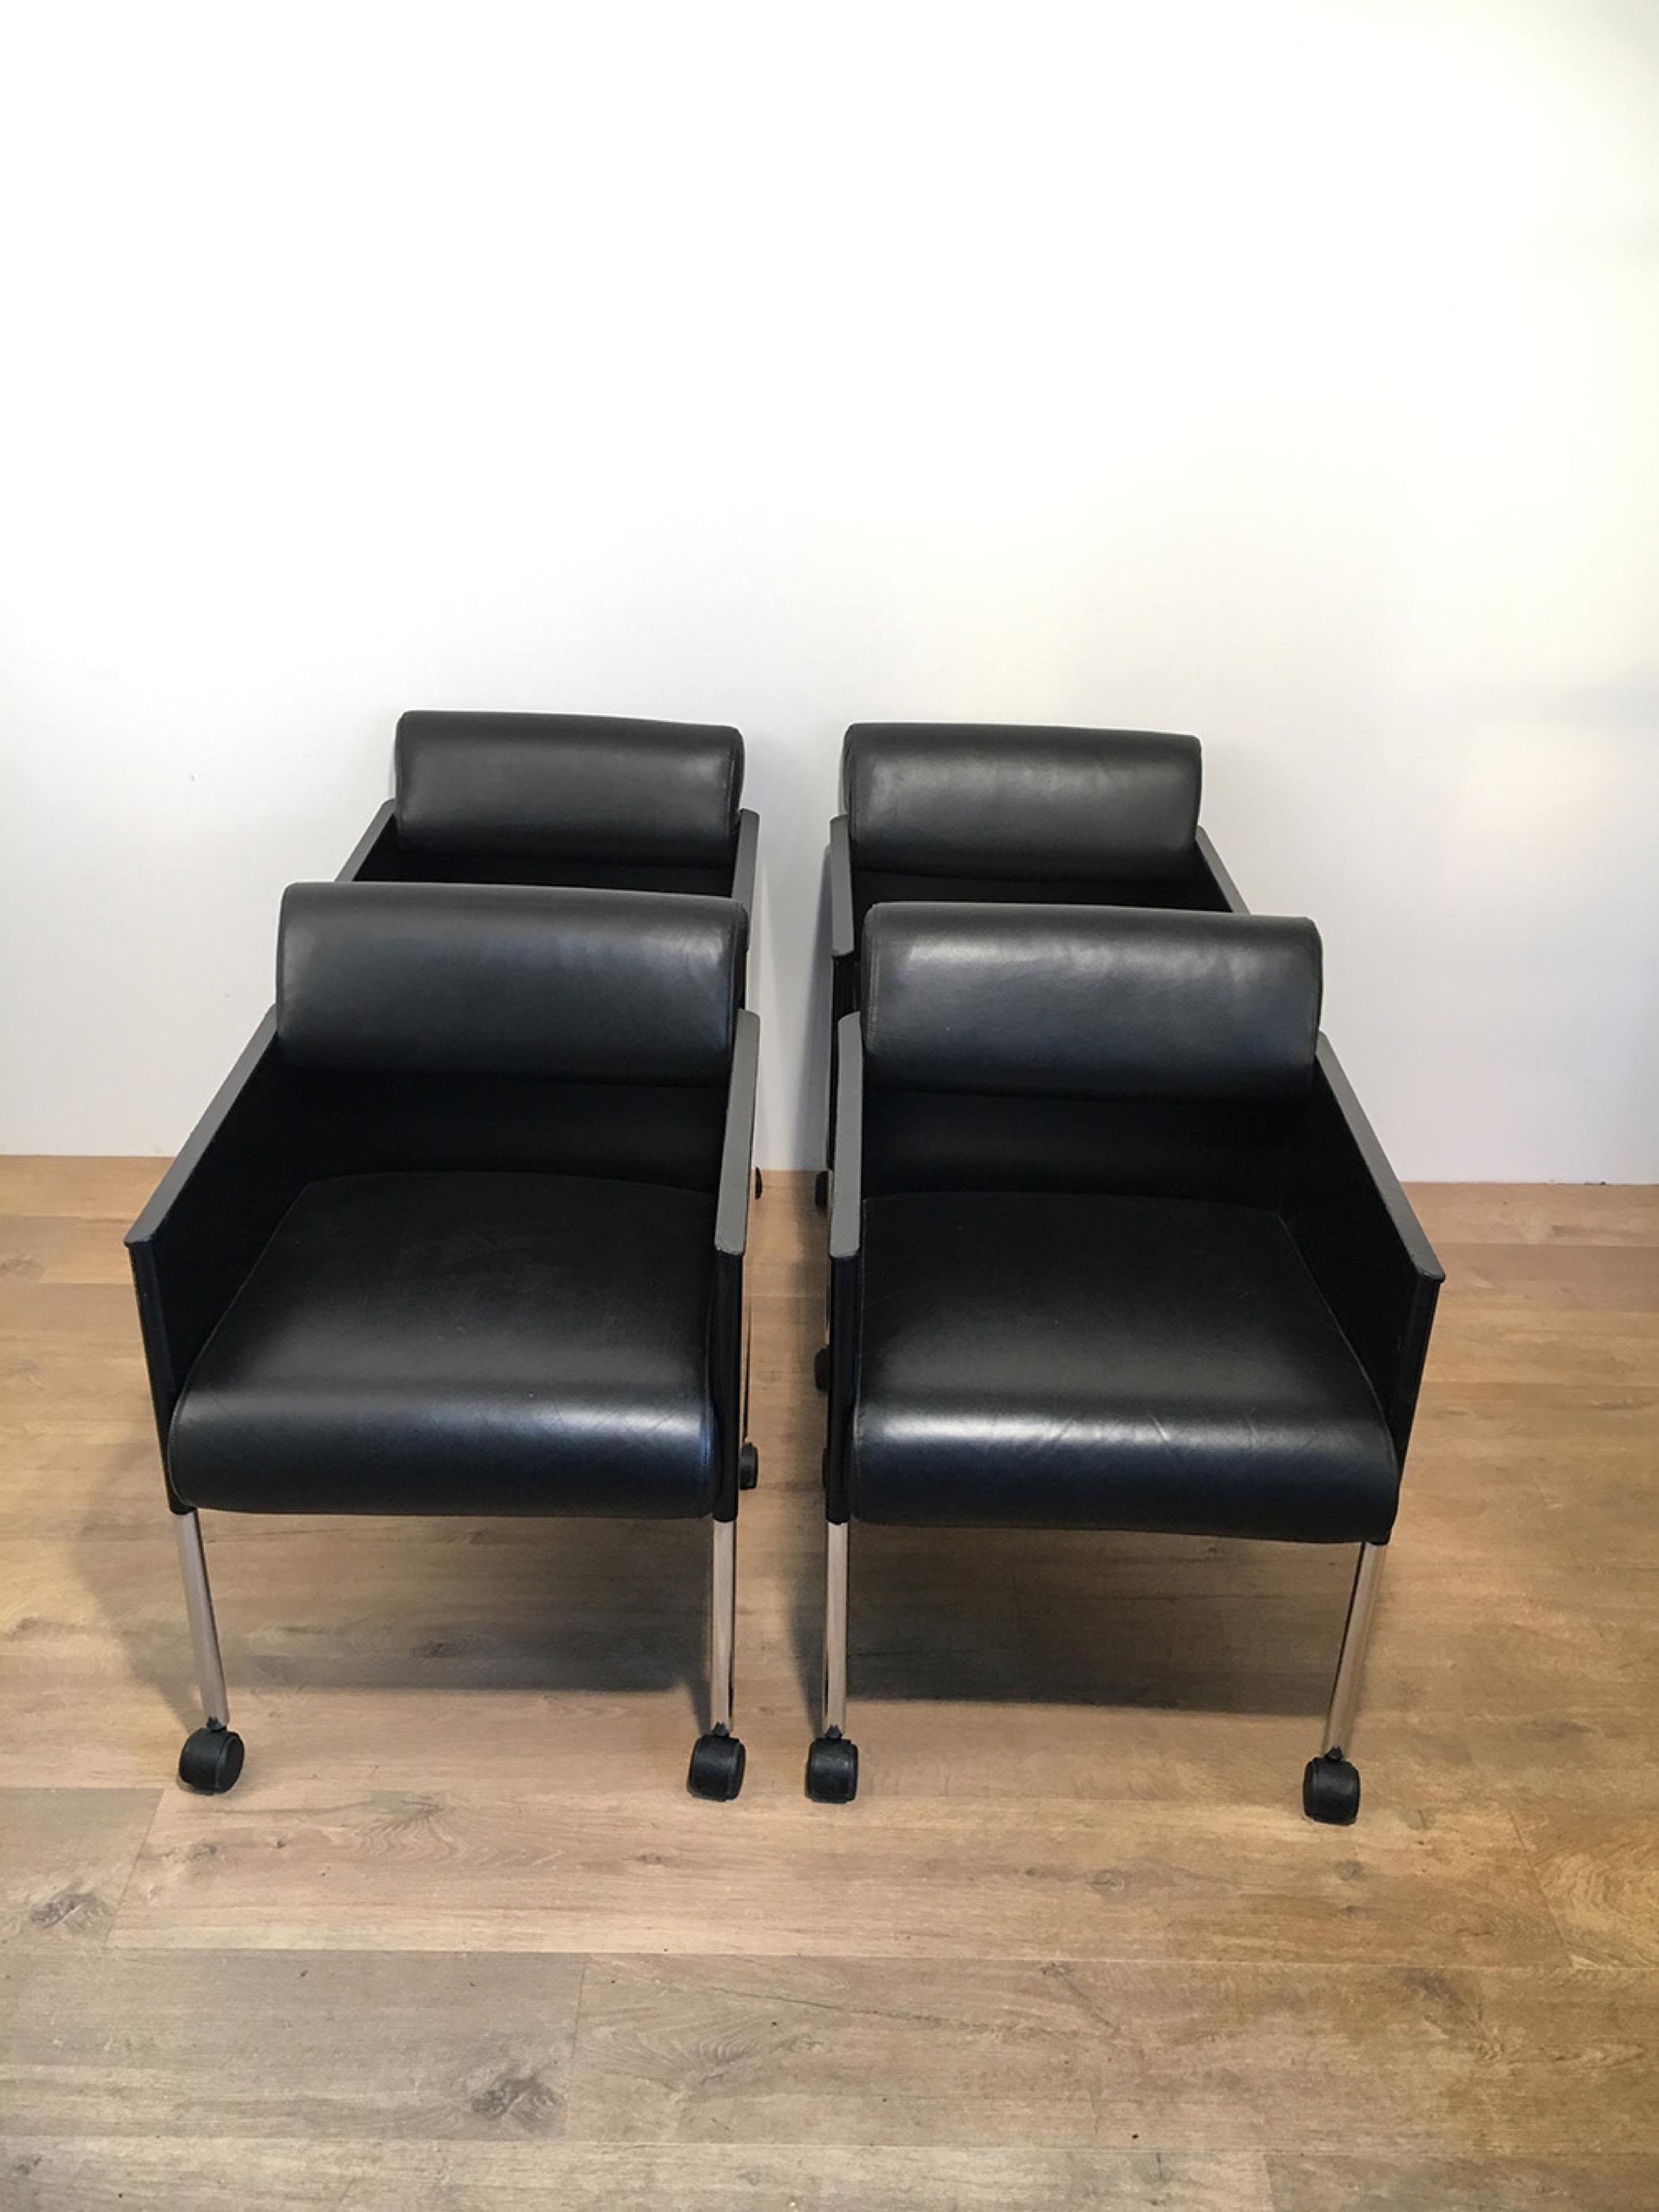 Set of 4 Black Lacquered and Leather Armchairs on Casters by Rosenthal. Cir 1970 For Sale 11